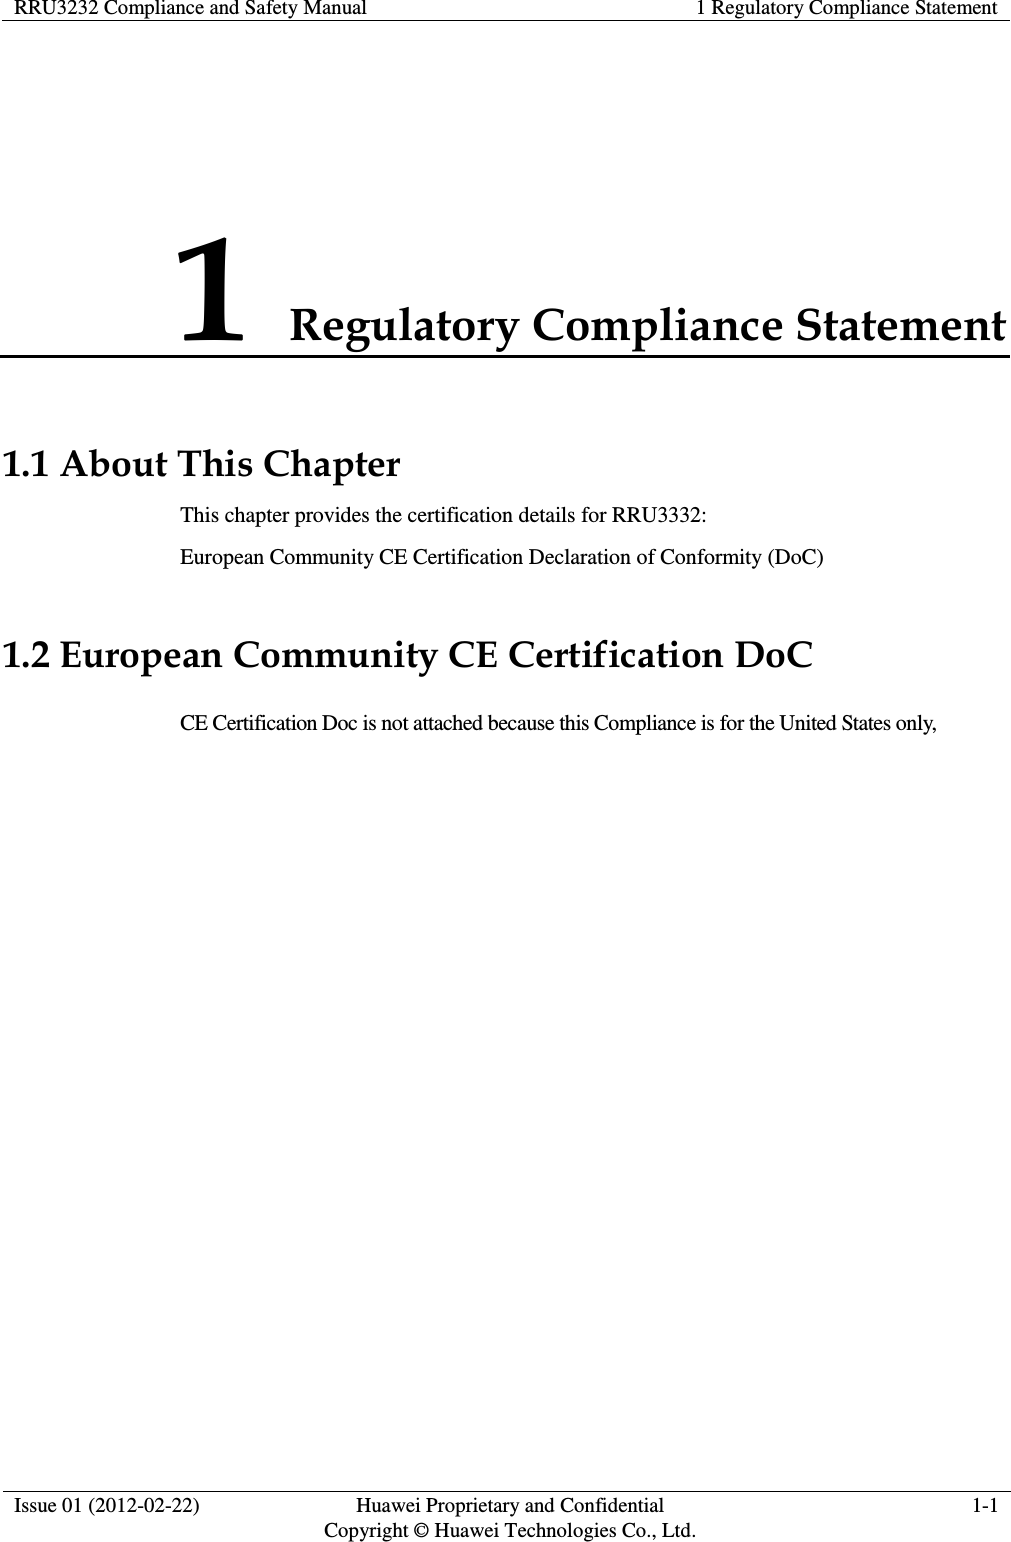 RRU3232 Compliance and Safety Manual 1 Regulatory Compliance Statement  Issue 01 (2012-02-22) Huawei Proprietary and Confidential         Copyright © Huawei Technologies Co., Ltd. 1-1  1 Regulatory Compliance Statement 1.1 About This Chapter This chapter provides the certification details for RRU3332: European Community CE Certification Declaration of Conformity (DoC) 1.2 European Community CE Certification DoC CE Certification Doc is not attached because this Compliance is for the United States only,   